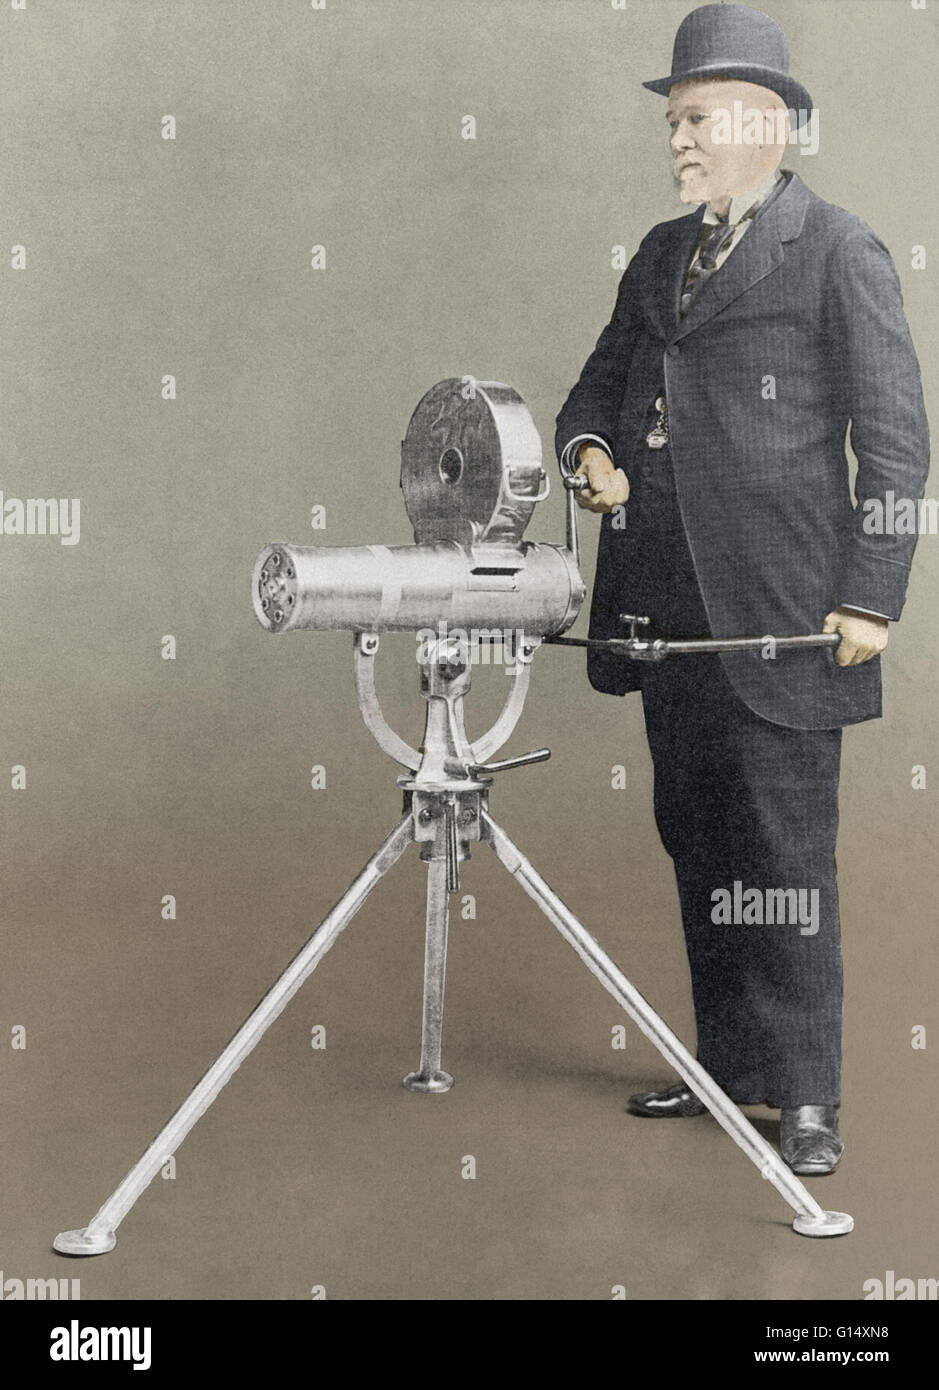 Richard Jordan Gatling (September 12, 1818 - February 26, 1903) was an American inventor. While being most known for inventing the Gatling Gun, Gatling invented and patented a number of other inventions. His inventions include a screw propeller and a whea Stock Photo